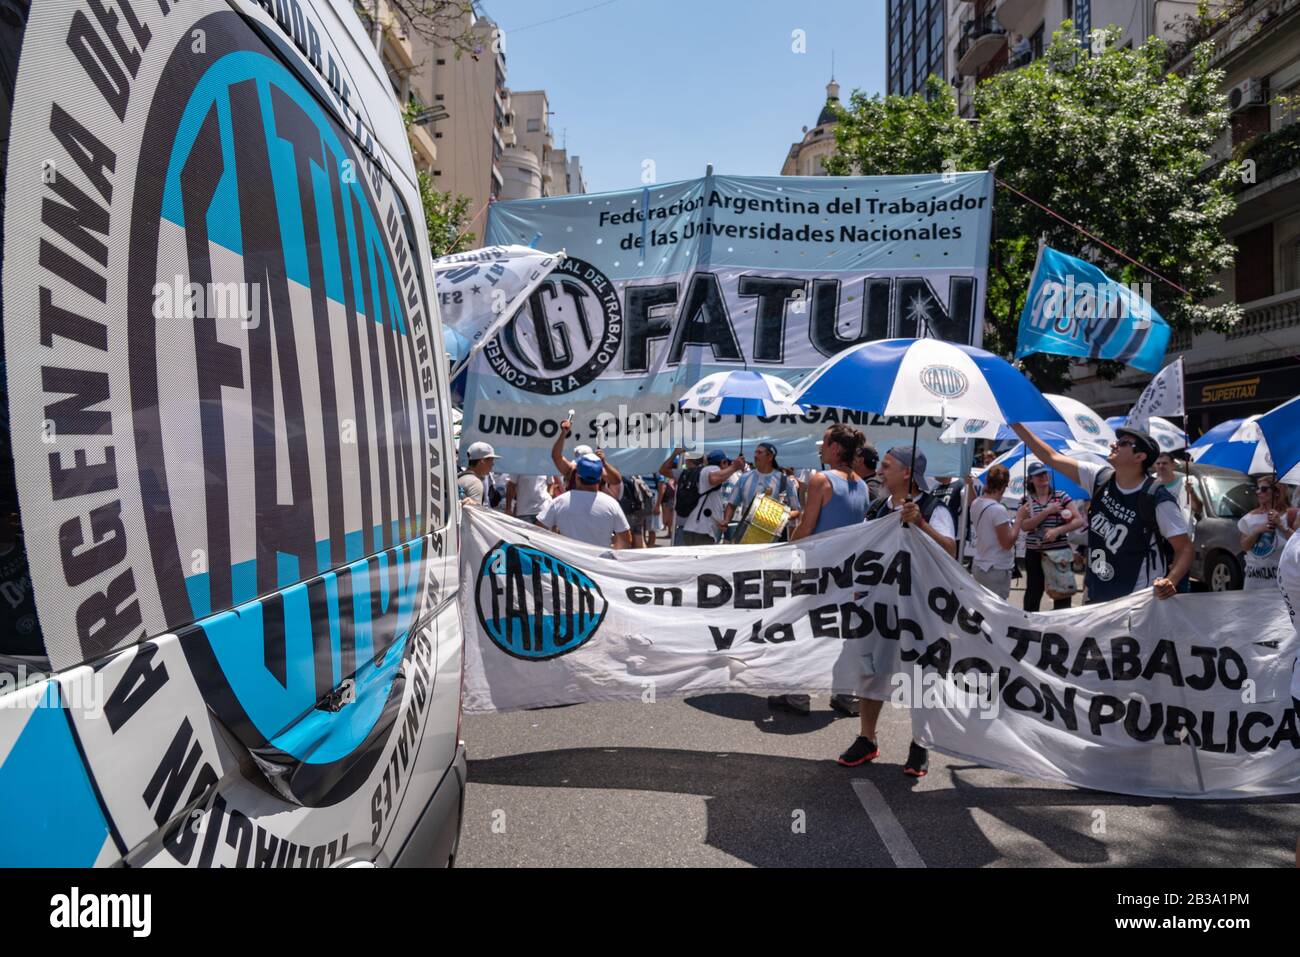 Buenos Aires, Argentina; December 10, 2019: The front of a column of the Argentine Federation of the Worker of the Argentine National Universities mob Stock Photo